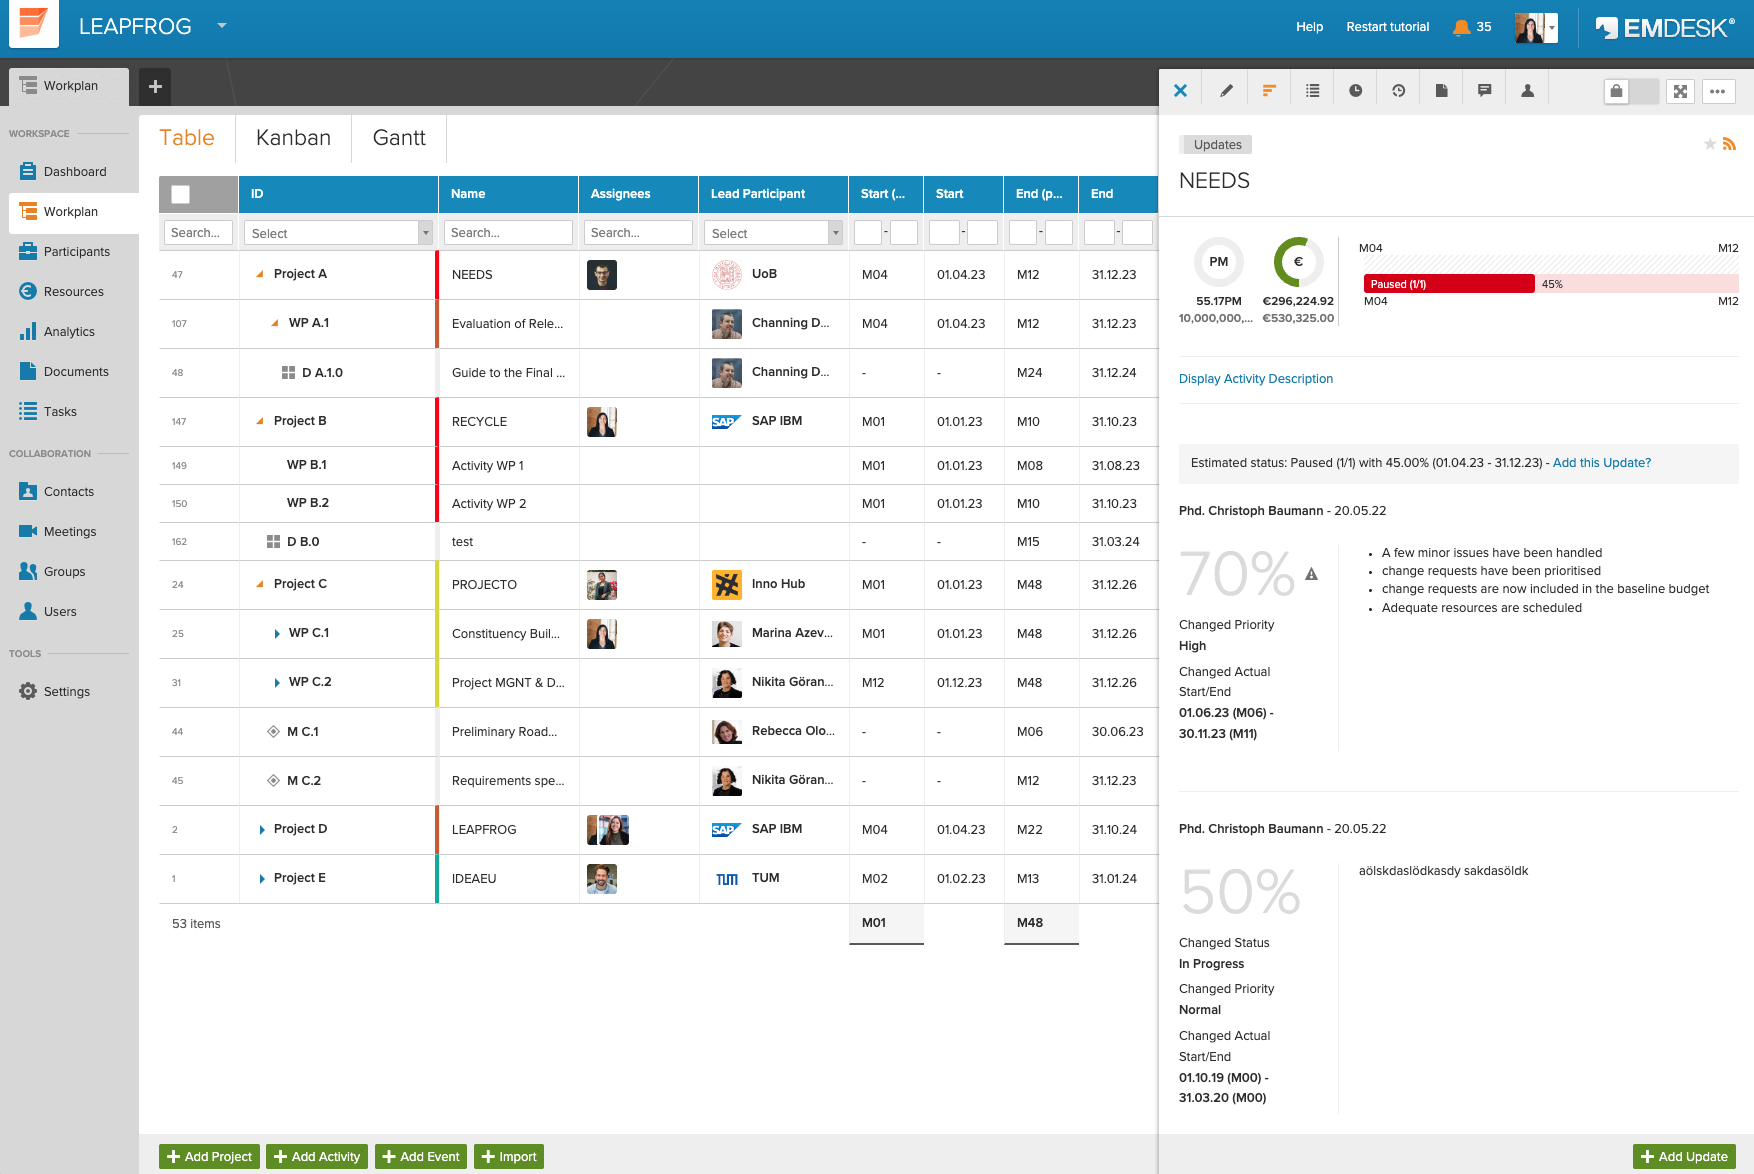 Execute & Report: Gain control by building reports that matter.